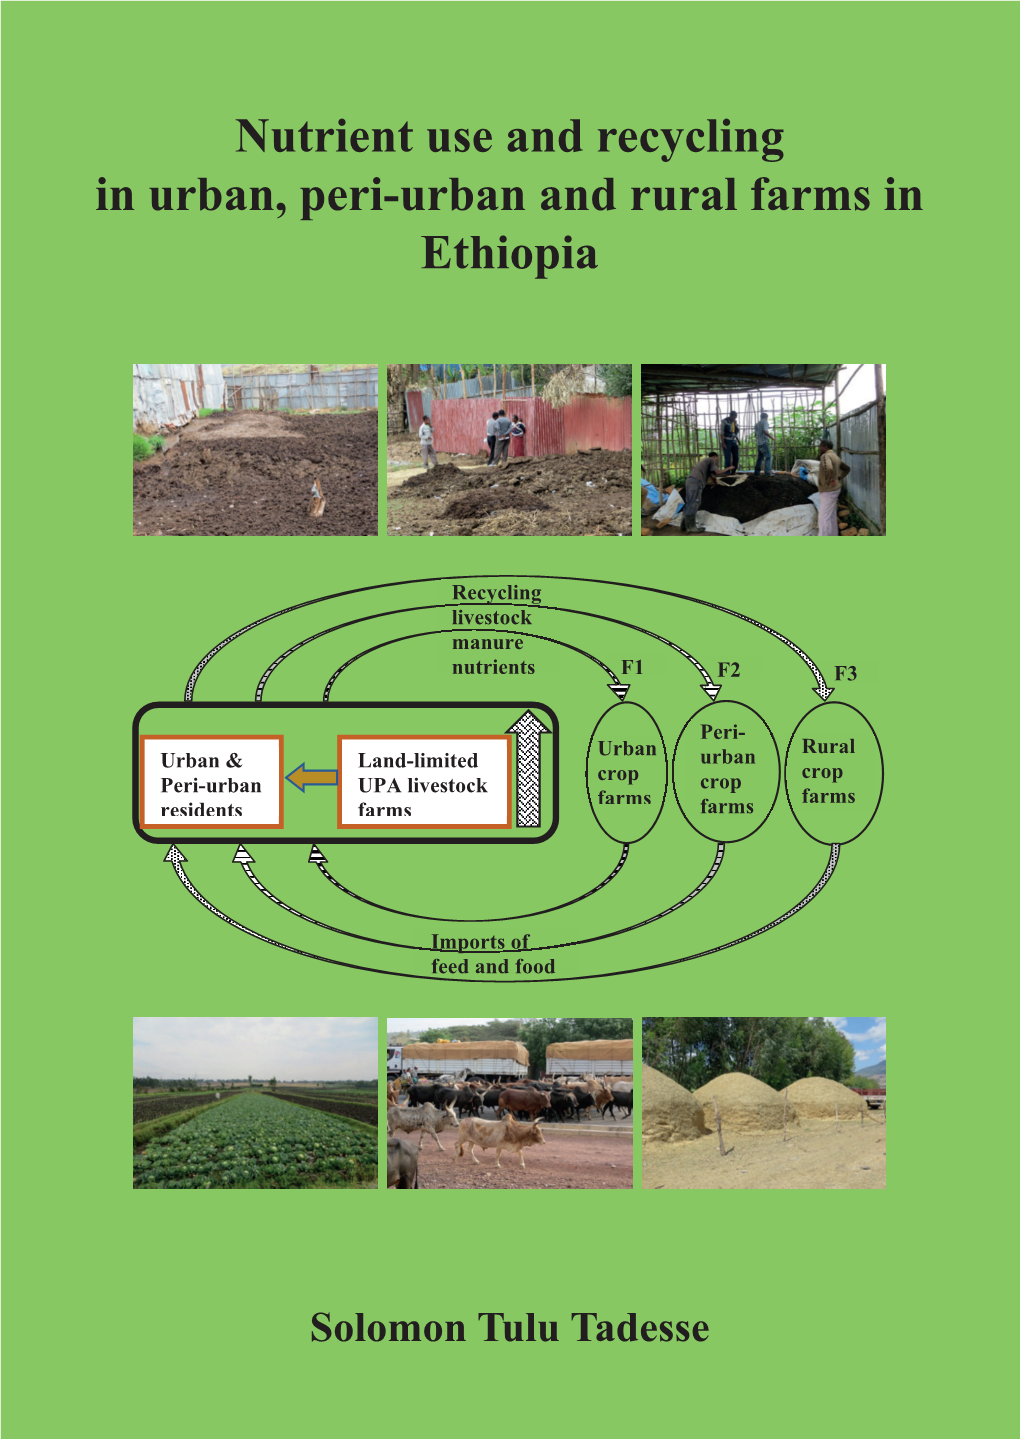 Nutrient Use and Recycling in Urban, Peri-Urban and Rural Farms in Ethiopia